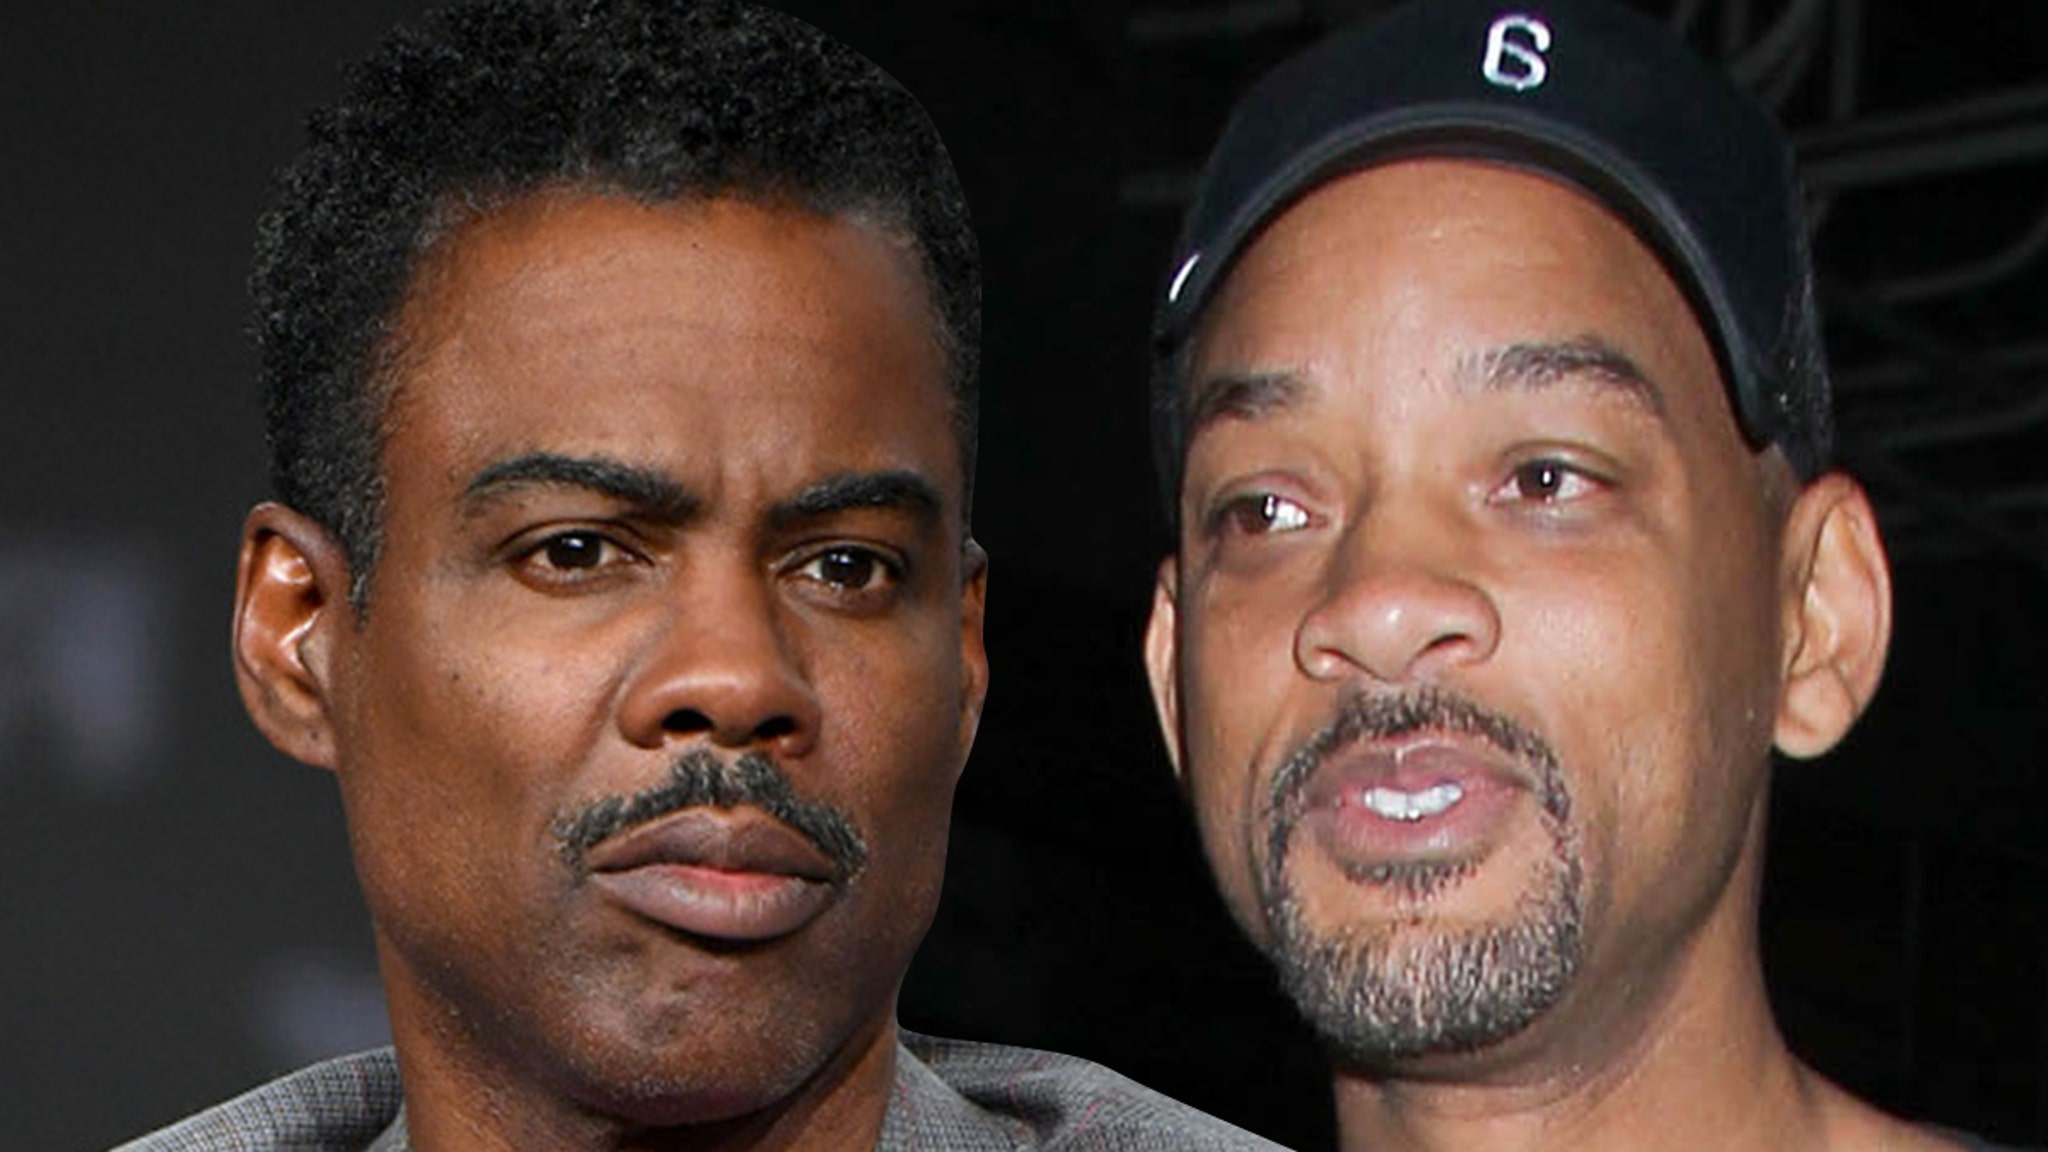 Chris Rock's Younger Brother Kenny Slams Will Smith, Calls for His Oscar